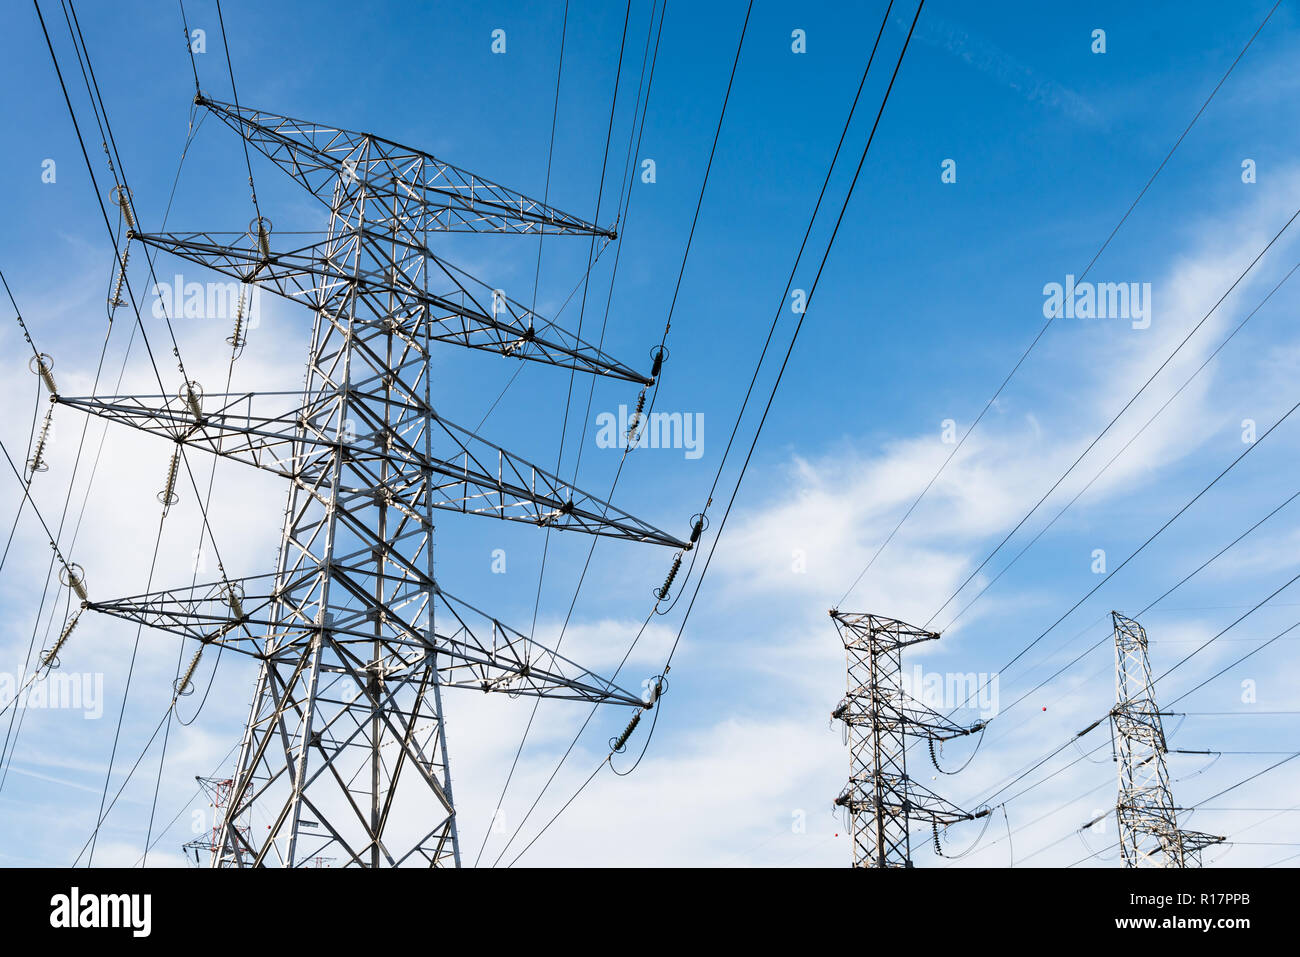 Overhead power lines and transmission towers. Stock Photo